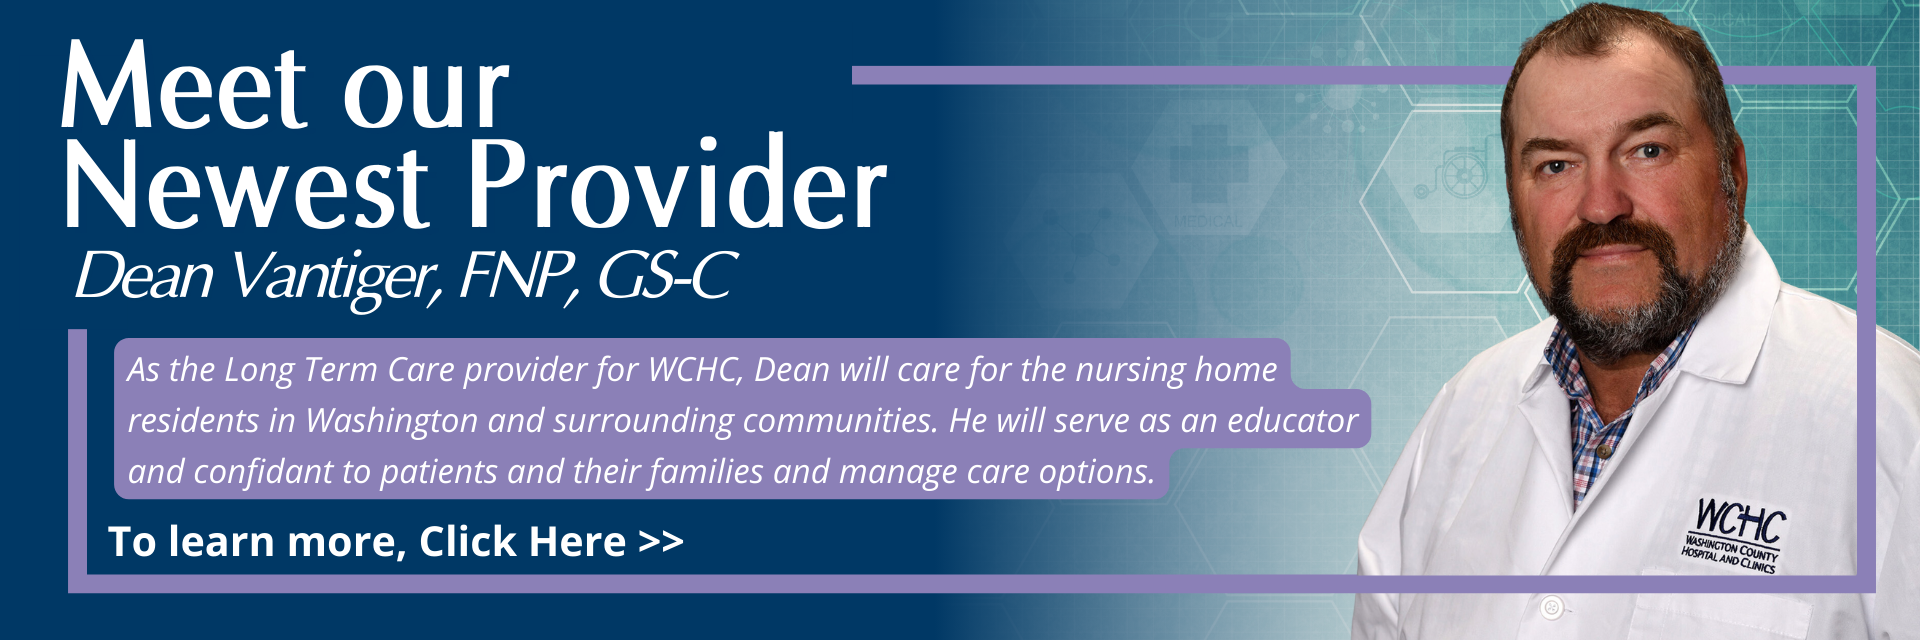 Welcome Dean Vantiger to WCHC - Long Term Care Provider